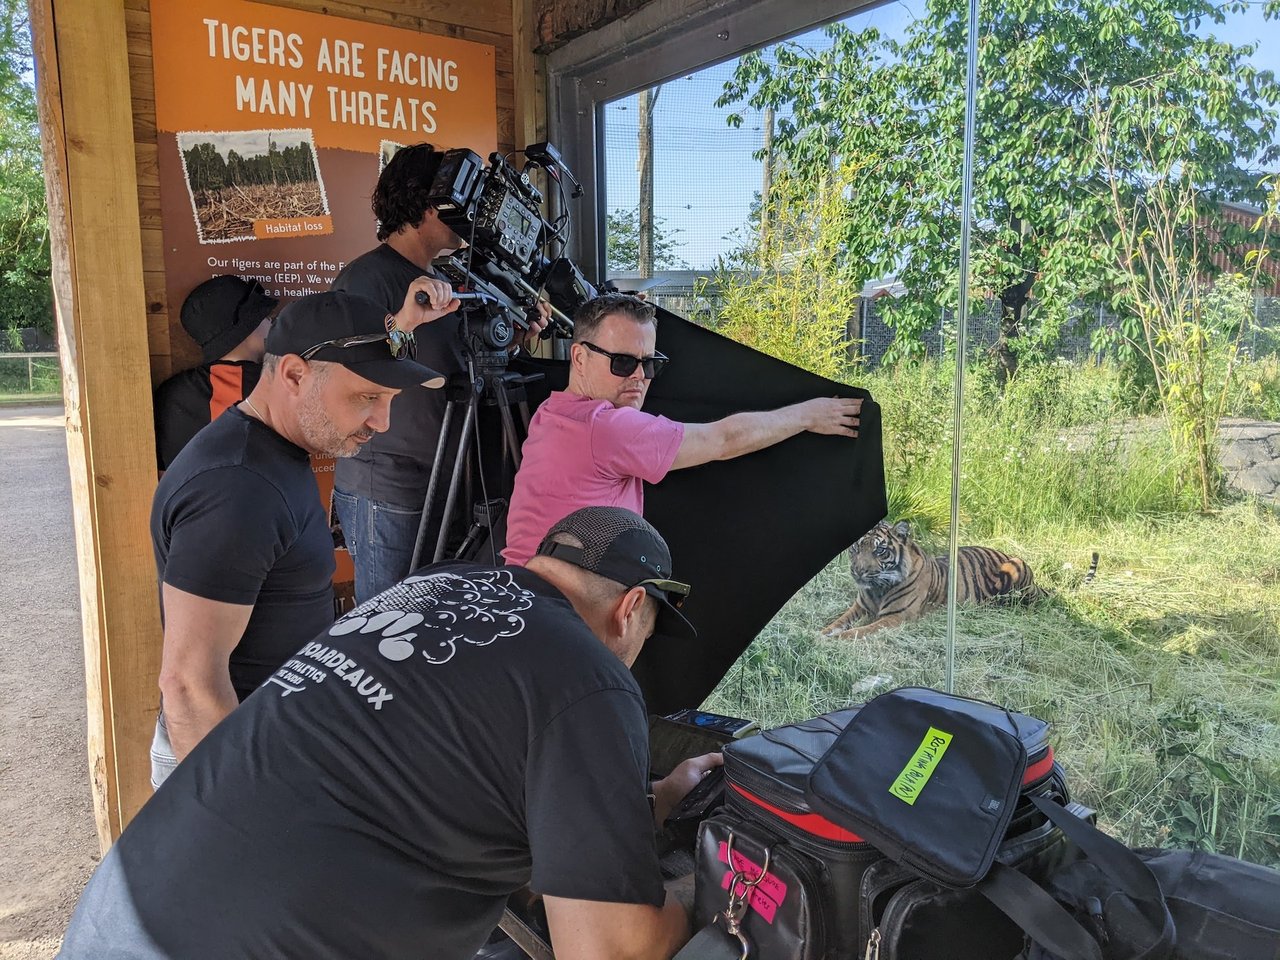 A film crew filming a tiger through the glass of its enclosure